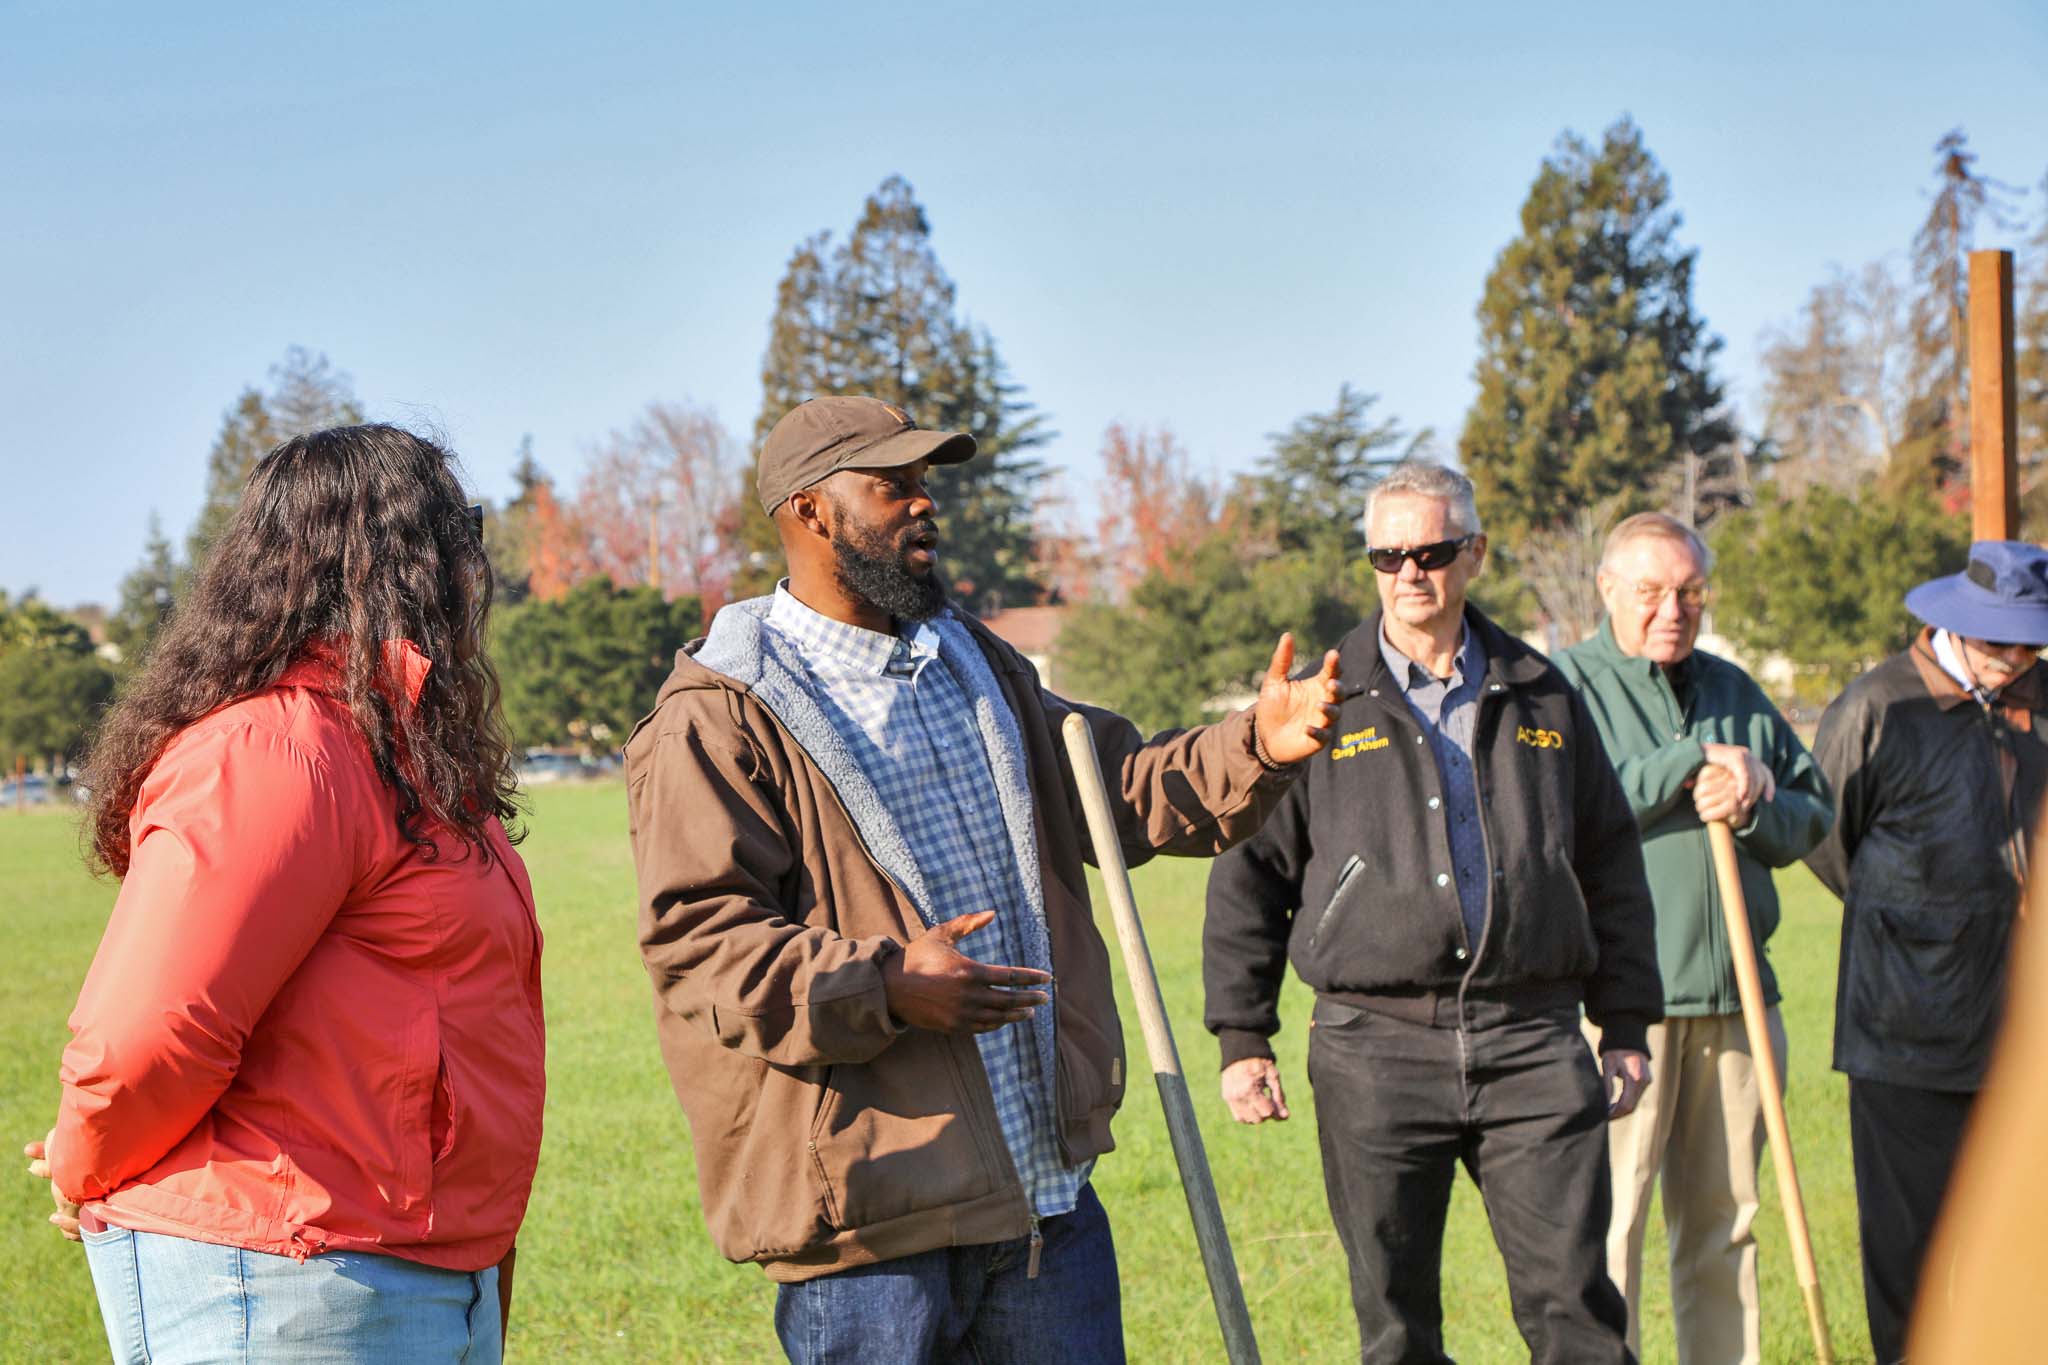 Leaders from the Masonic Homes, the Alameda County Deputy Sheriff’s Association, and Dig Deep Farms break ground on a new 10-acre urban farm.